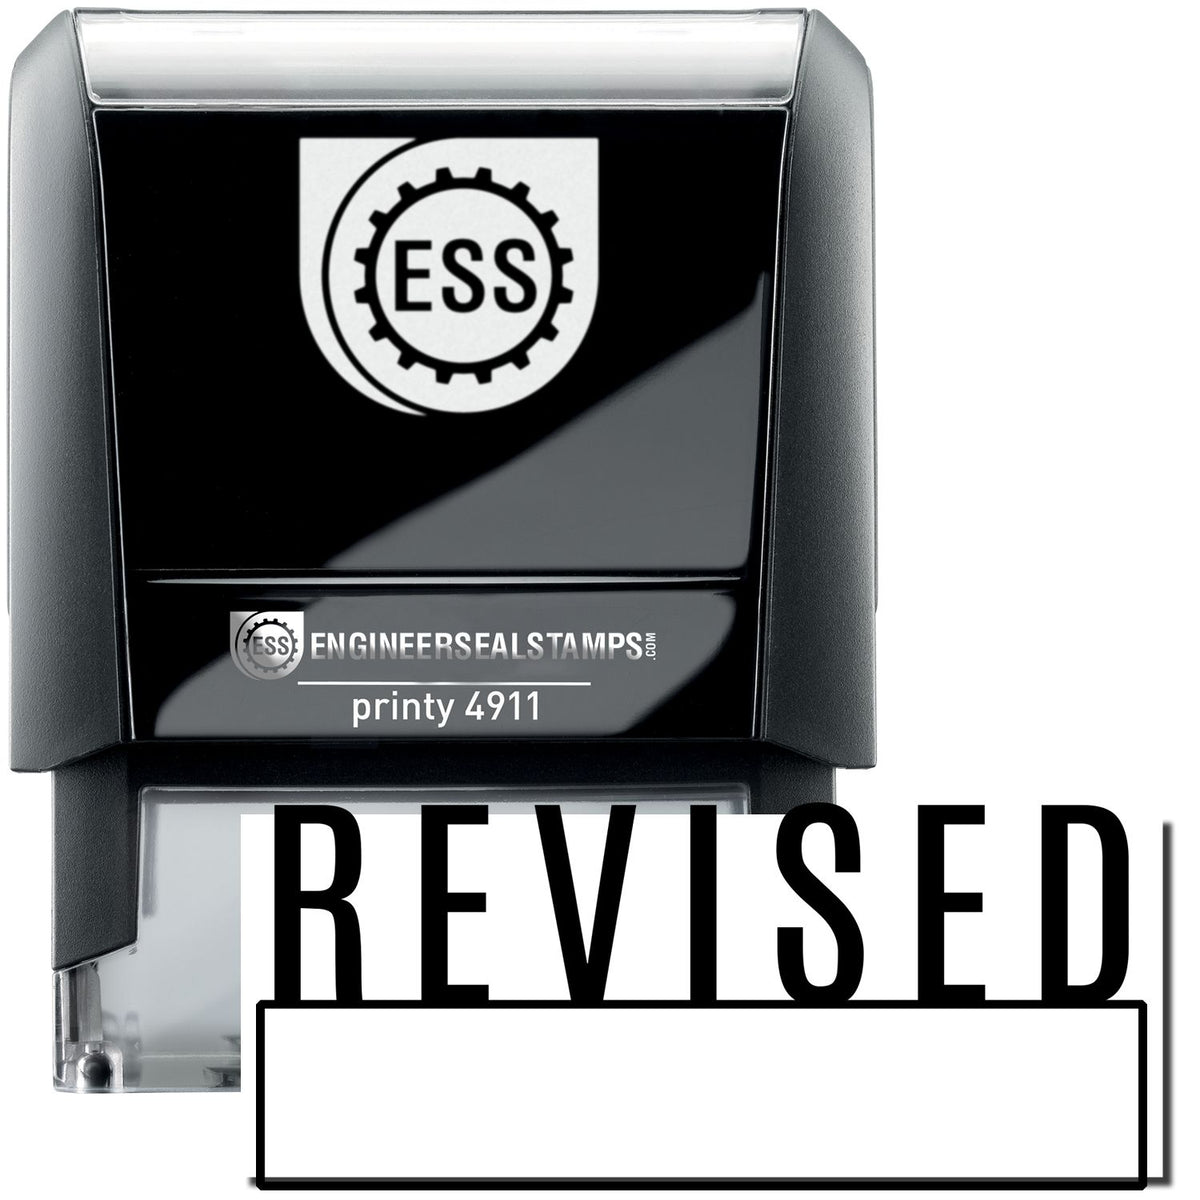 A self-inking stamp with a stamped image showing how the text &quot;REVISED&quot; with a box under it is displayed after stamping.